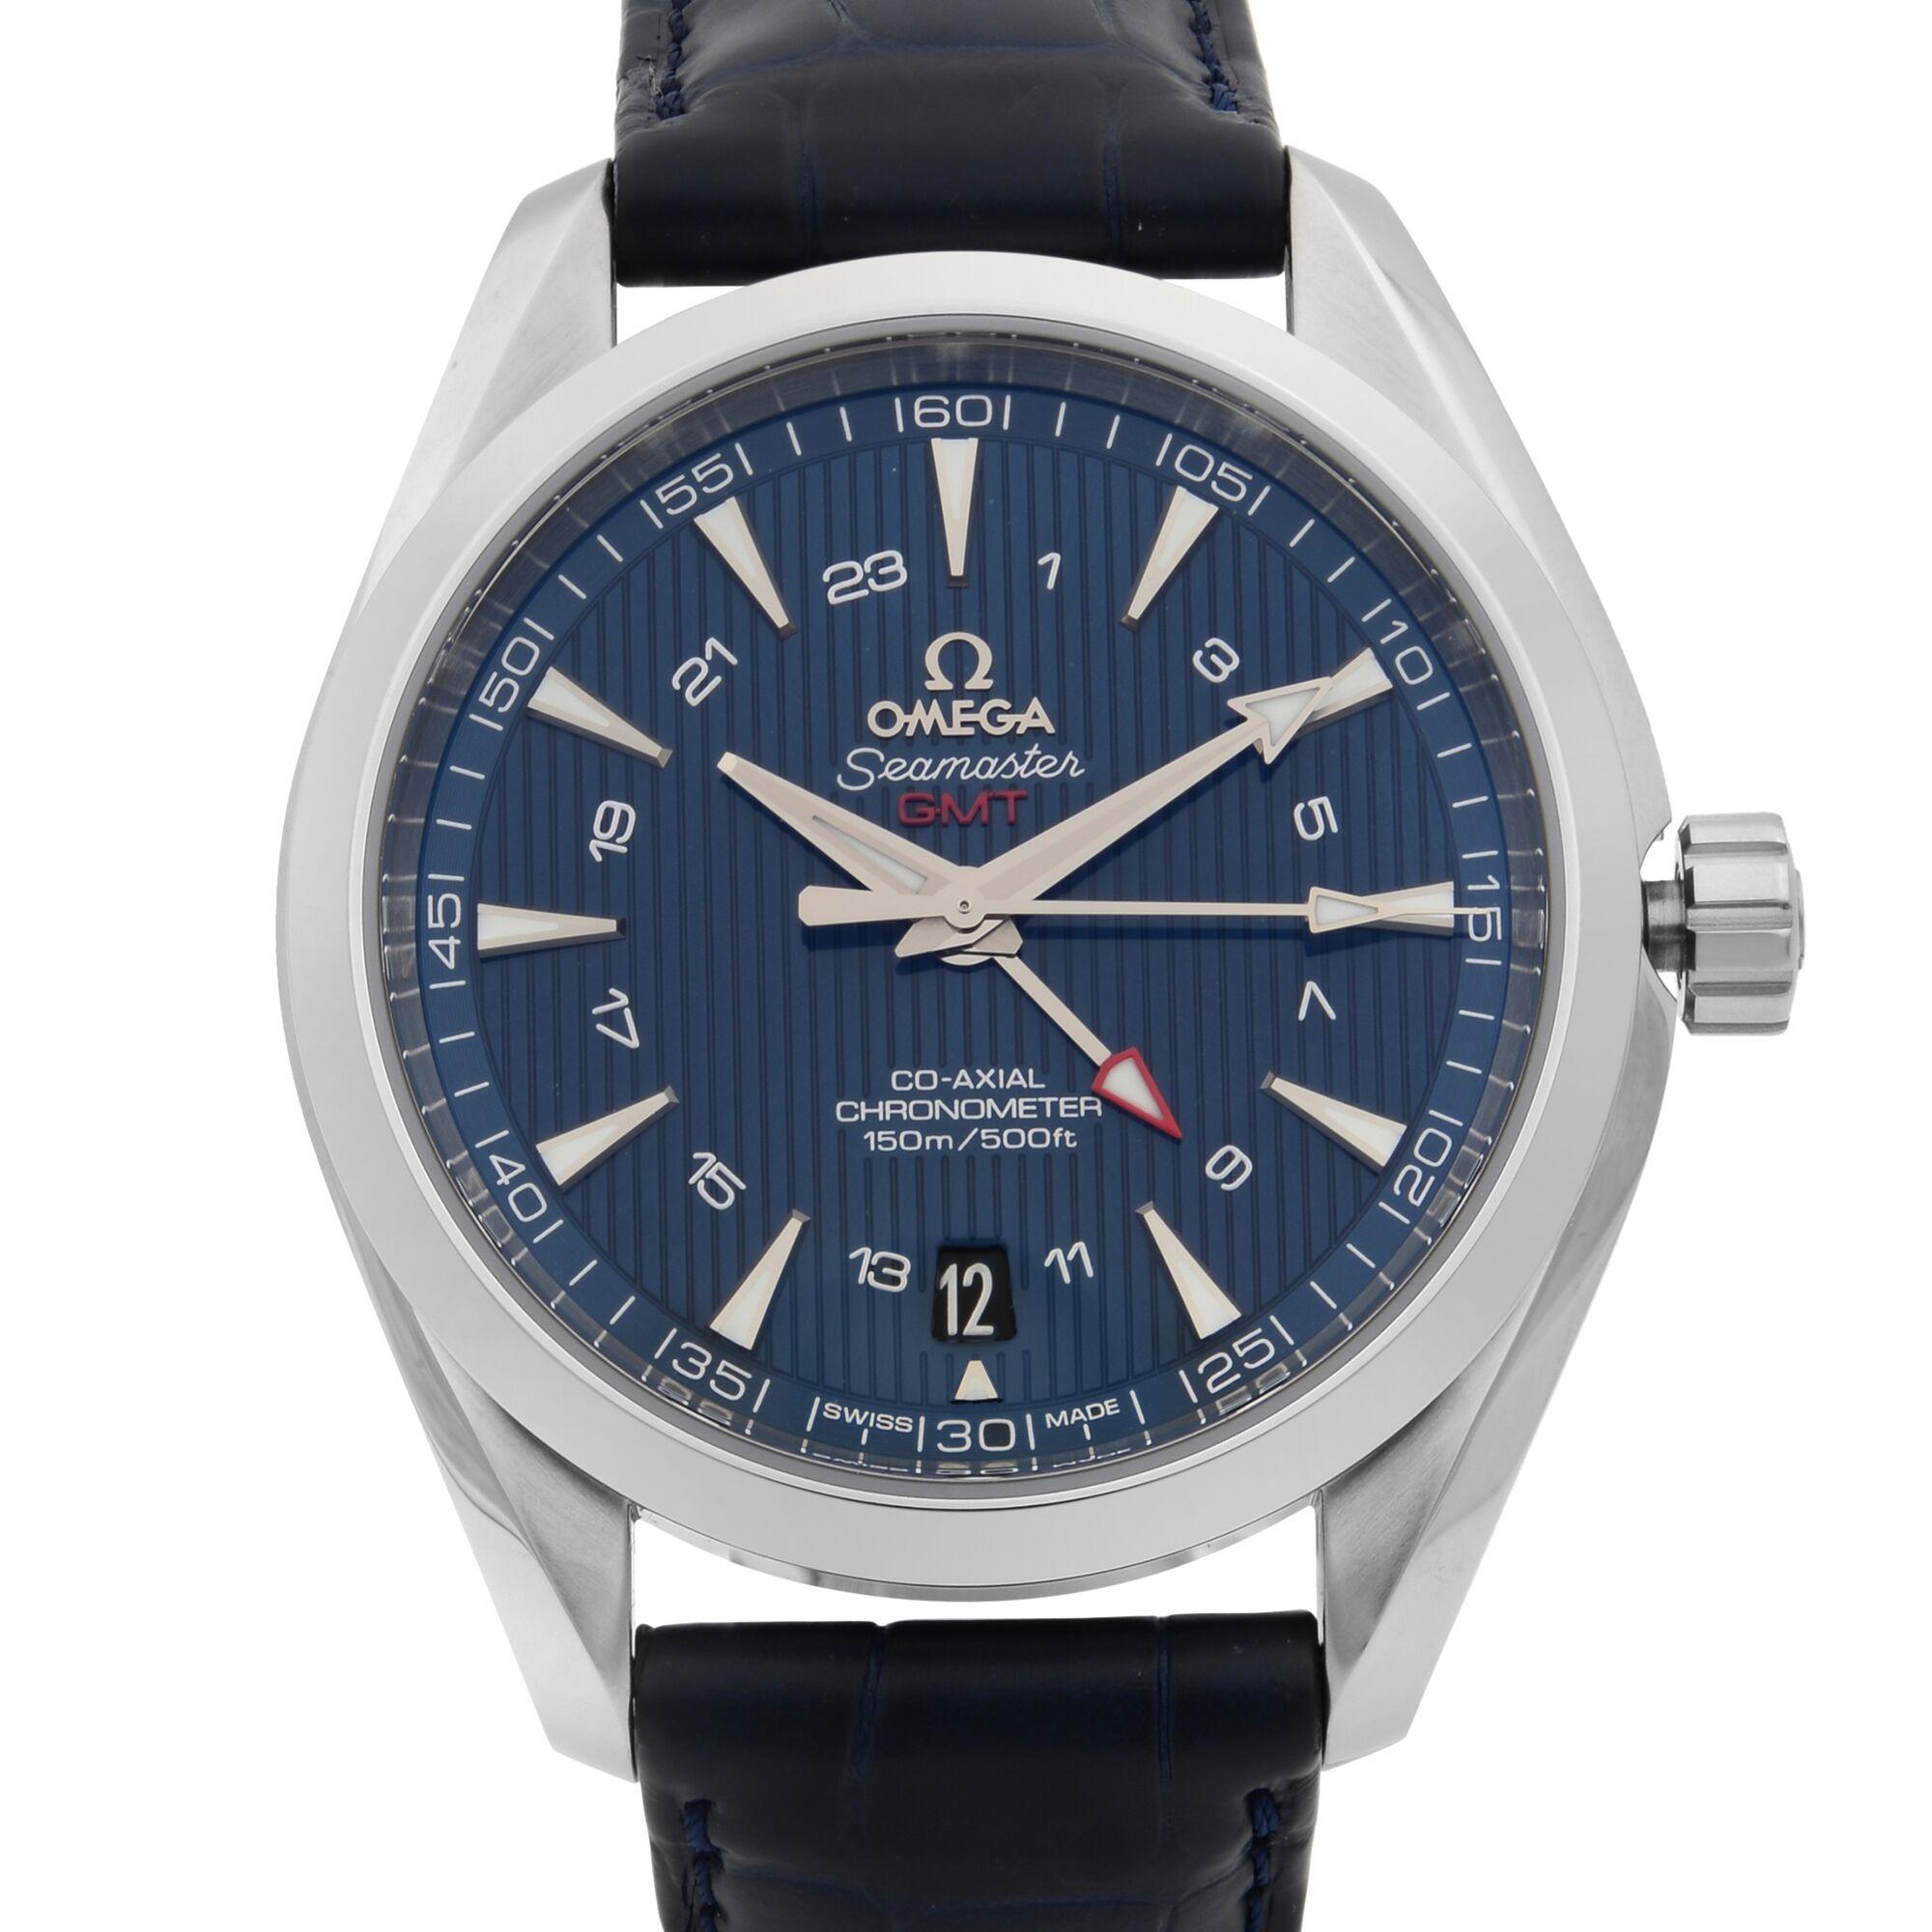 This brand new Omega Seamaster 231.13.43.22.03.001 is a beautiful men's timepiece that is powered by mechanical (automatic) movement which is cased in a stainless steel case. It has a round shape face, gmt, date indicator dial and has hand sticks